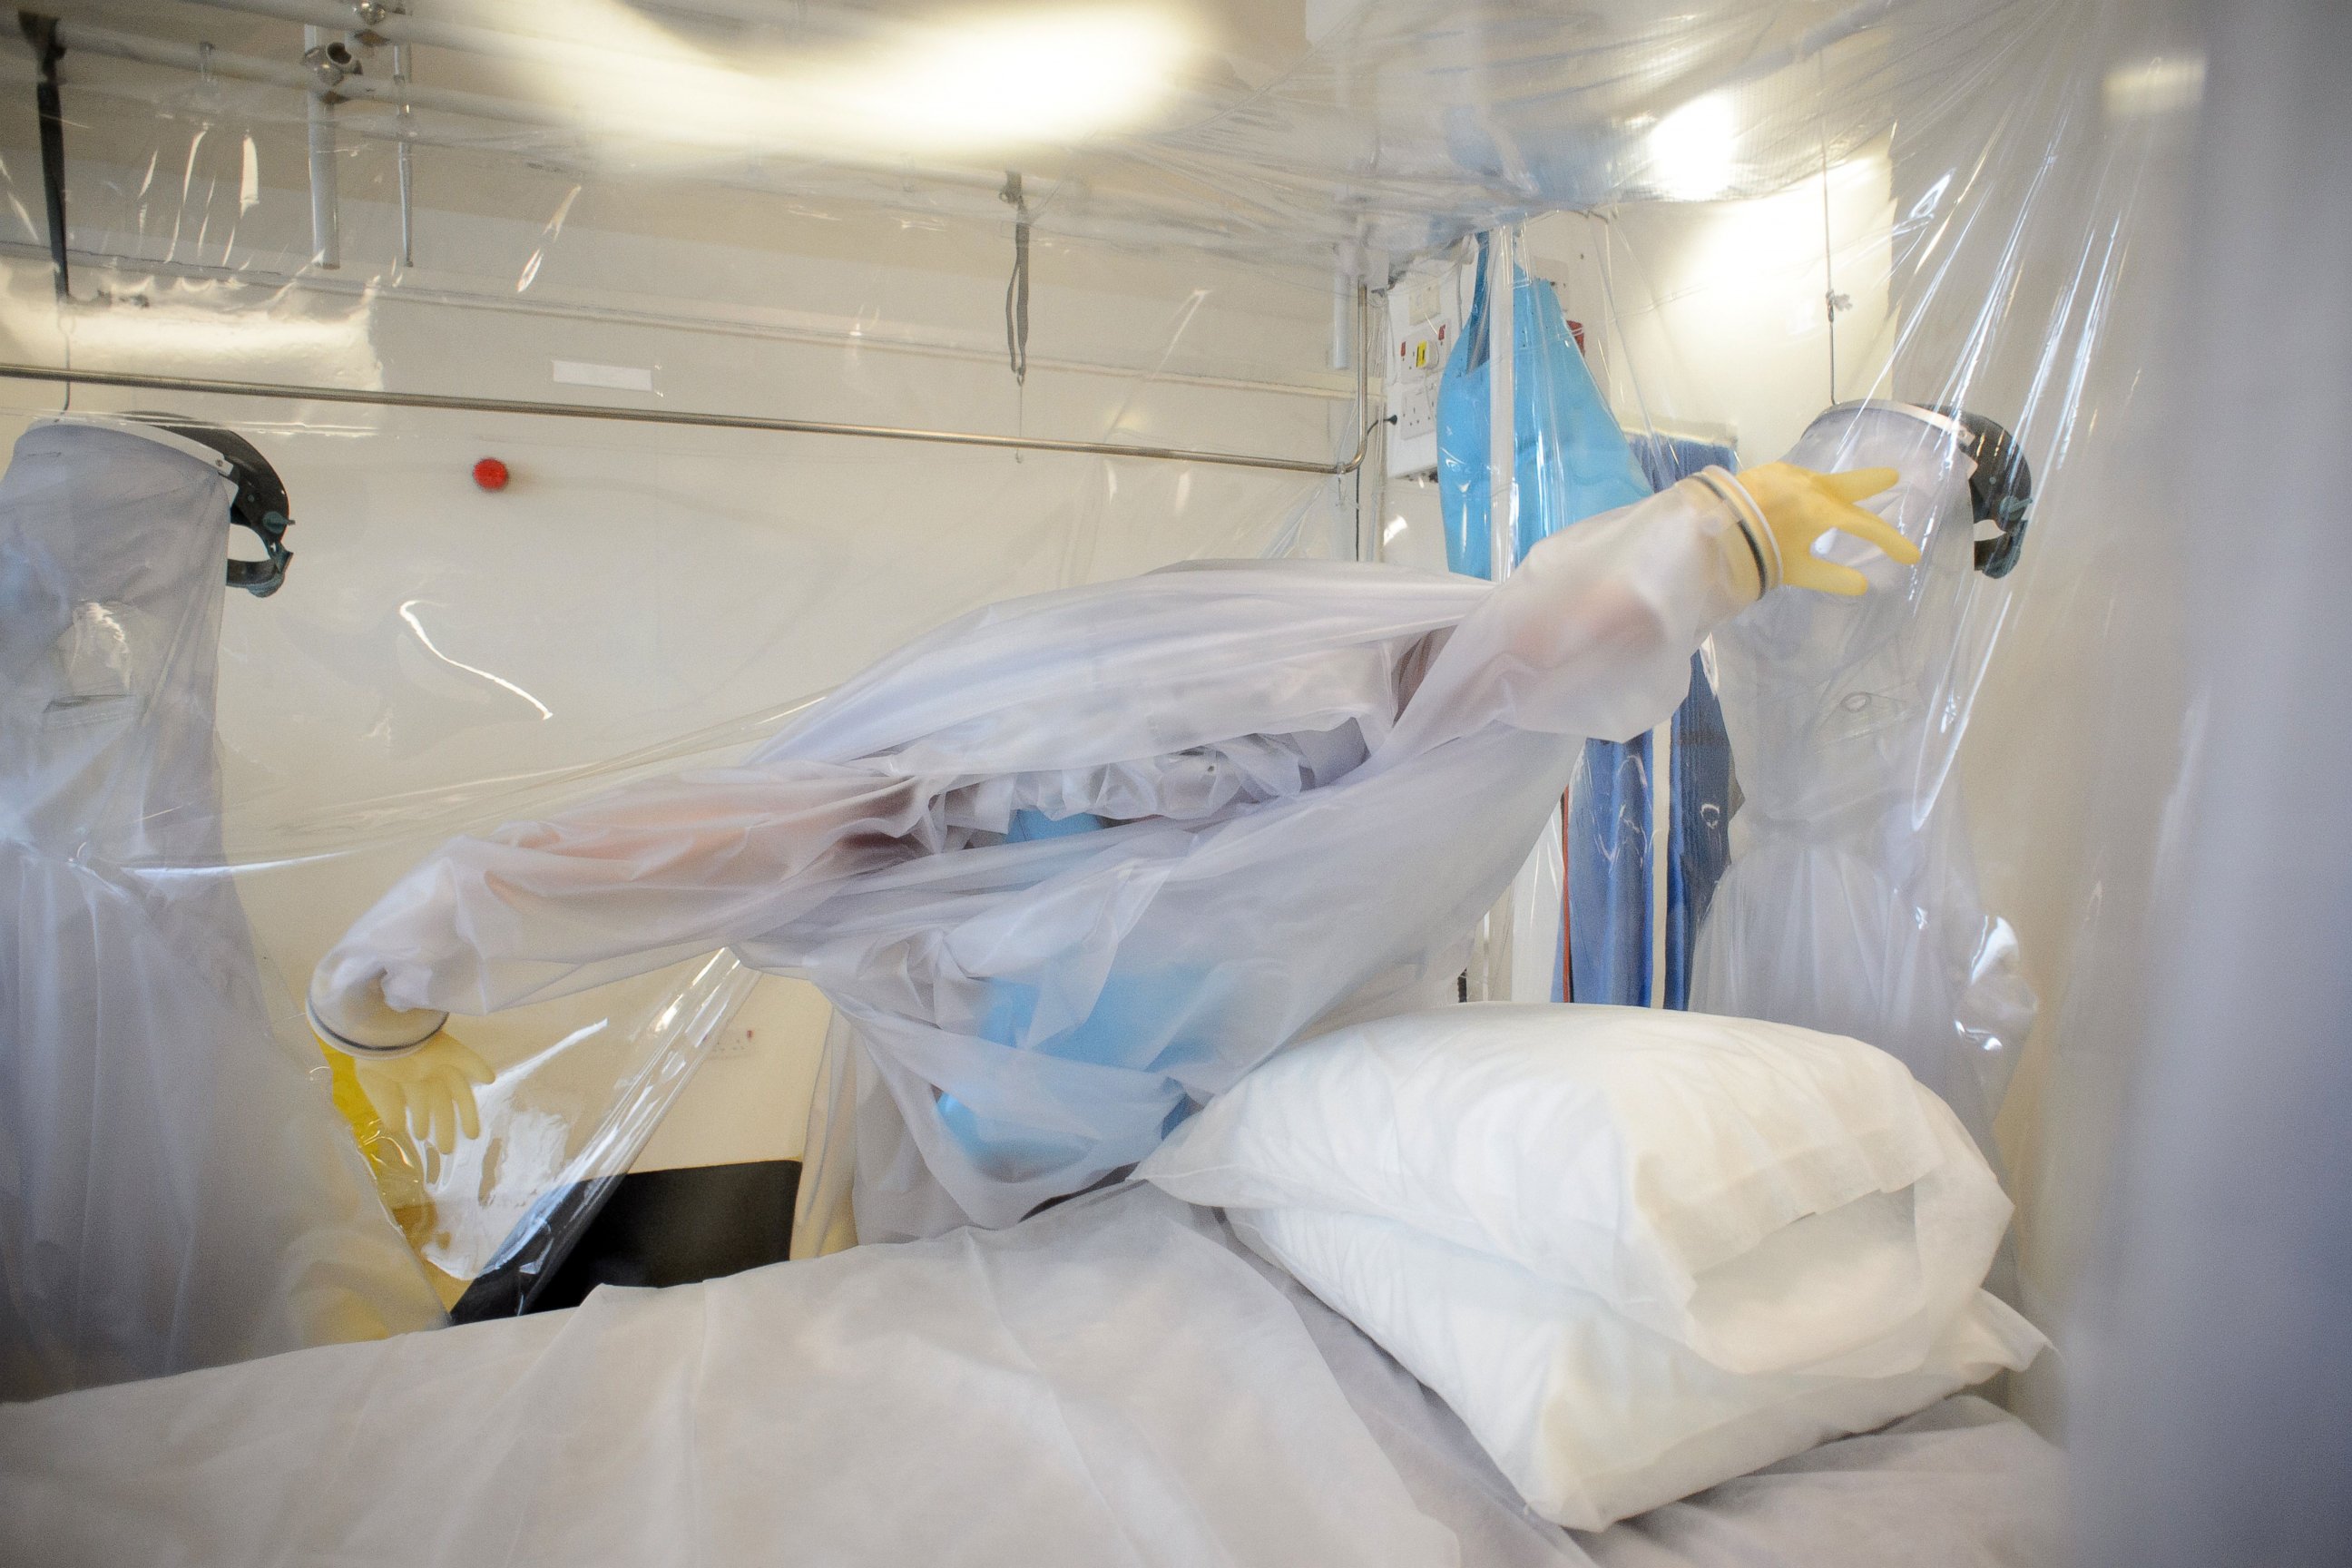 PHOTO: A nurse wears protective clothing as he demonstrates the facilities in place at the Royal Free Hospital in north London, Aug. 6, 2014, in preparation for a patient testing positive for the Ebola virus.